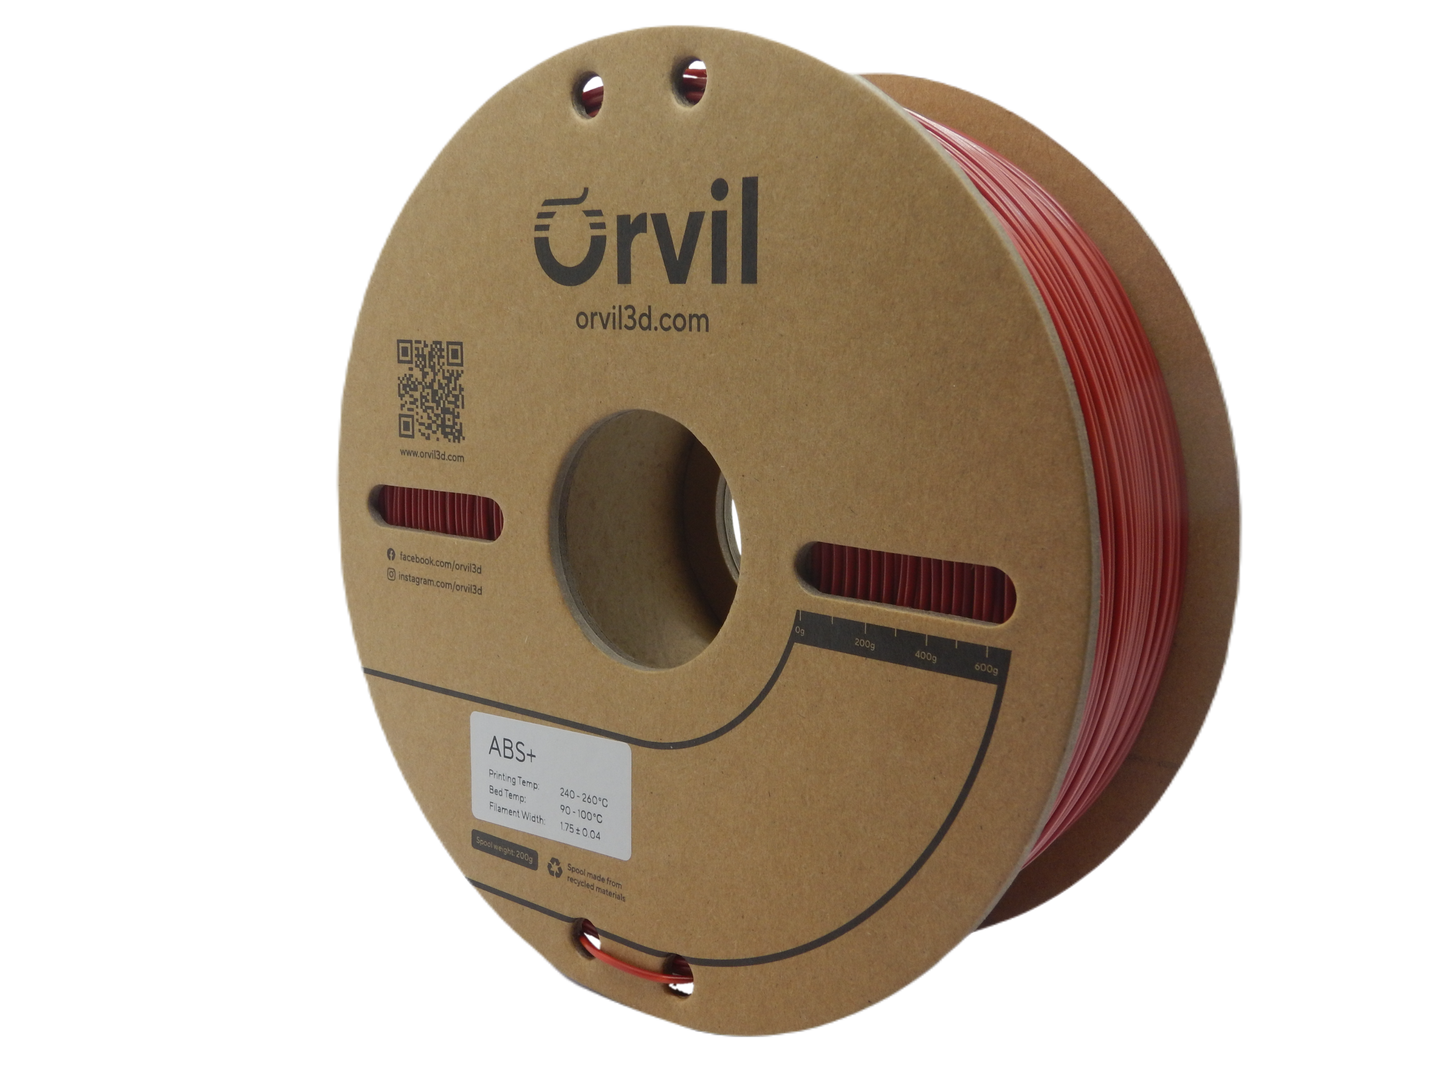 Orvil3d ABS+ Red